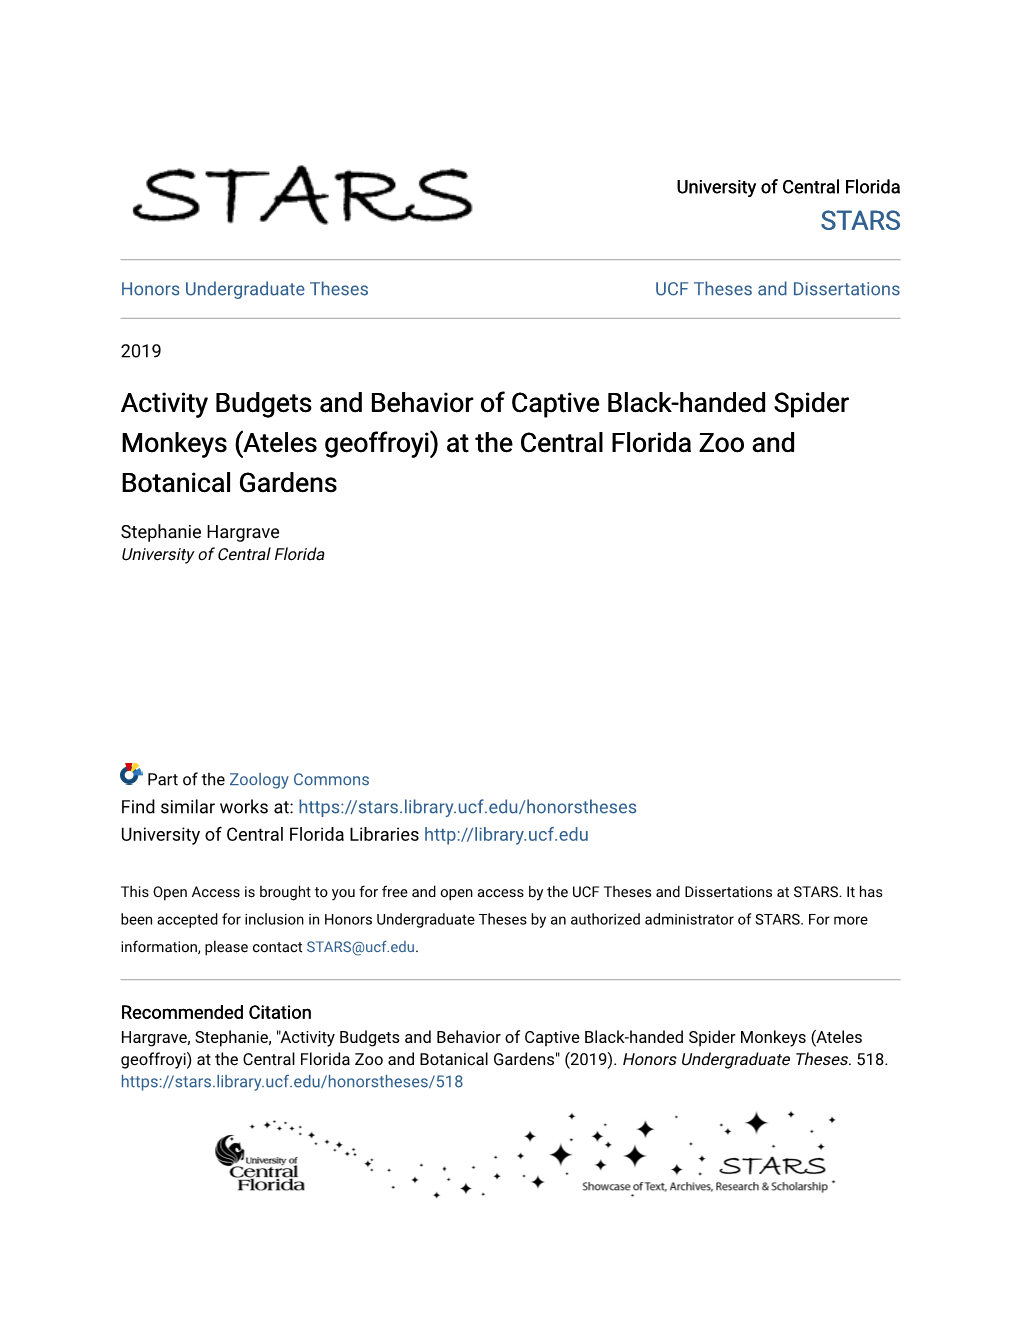 Activity Budgets and Behavior of Captive Black-Handed Spider Monkeys (Ateles Geoffroyi) at the Central Florida Zoo and Botanical Gardens